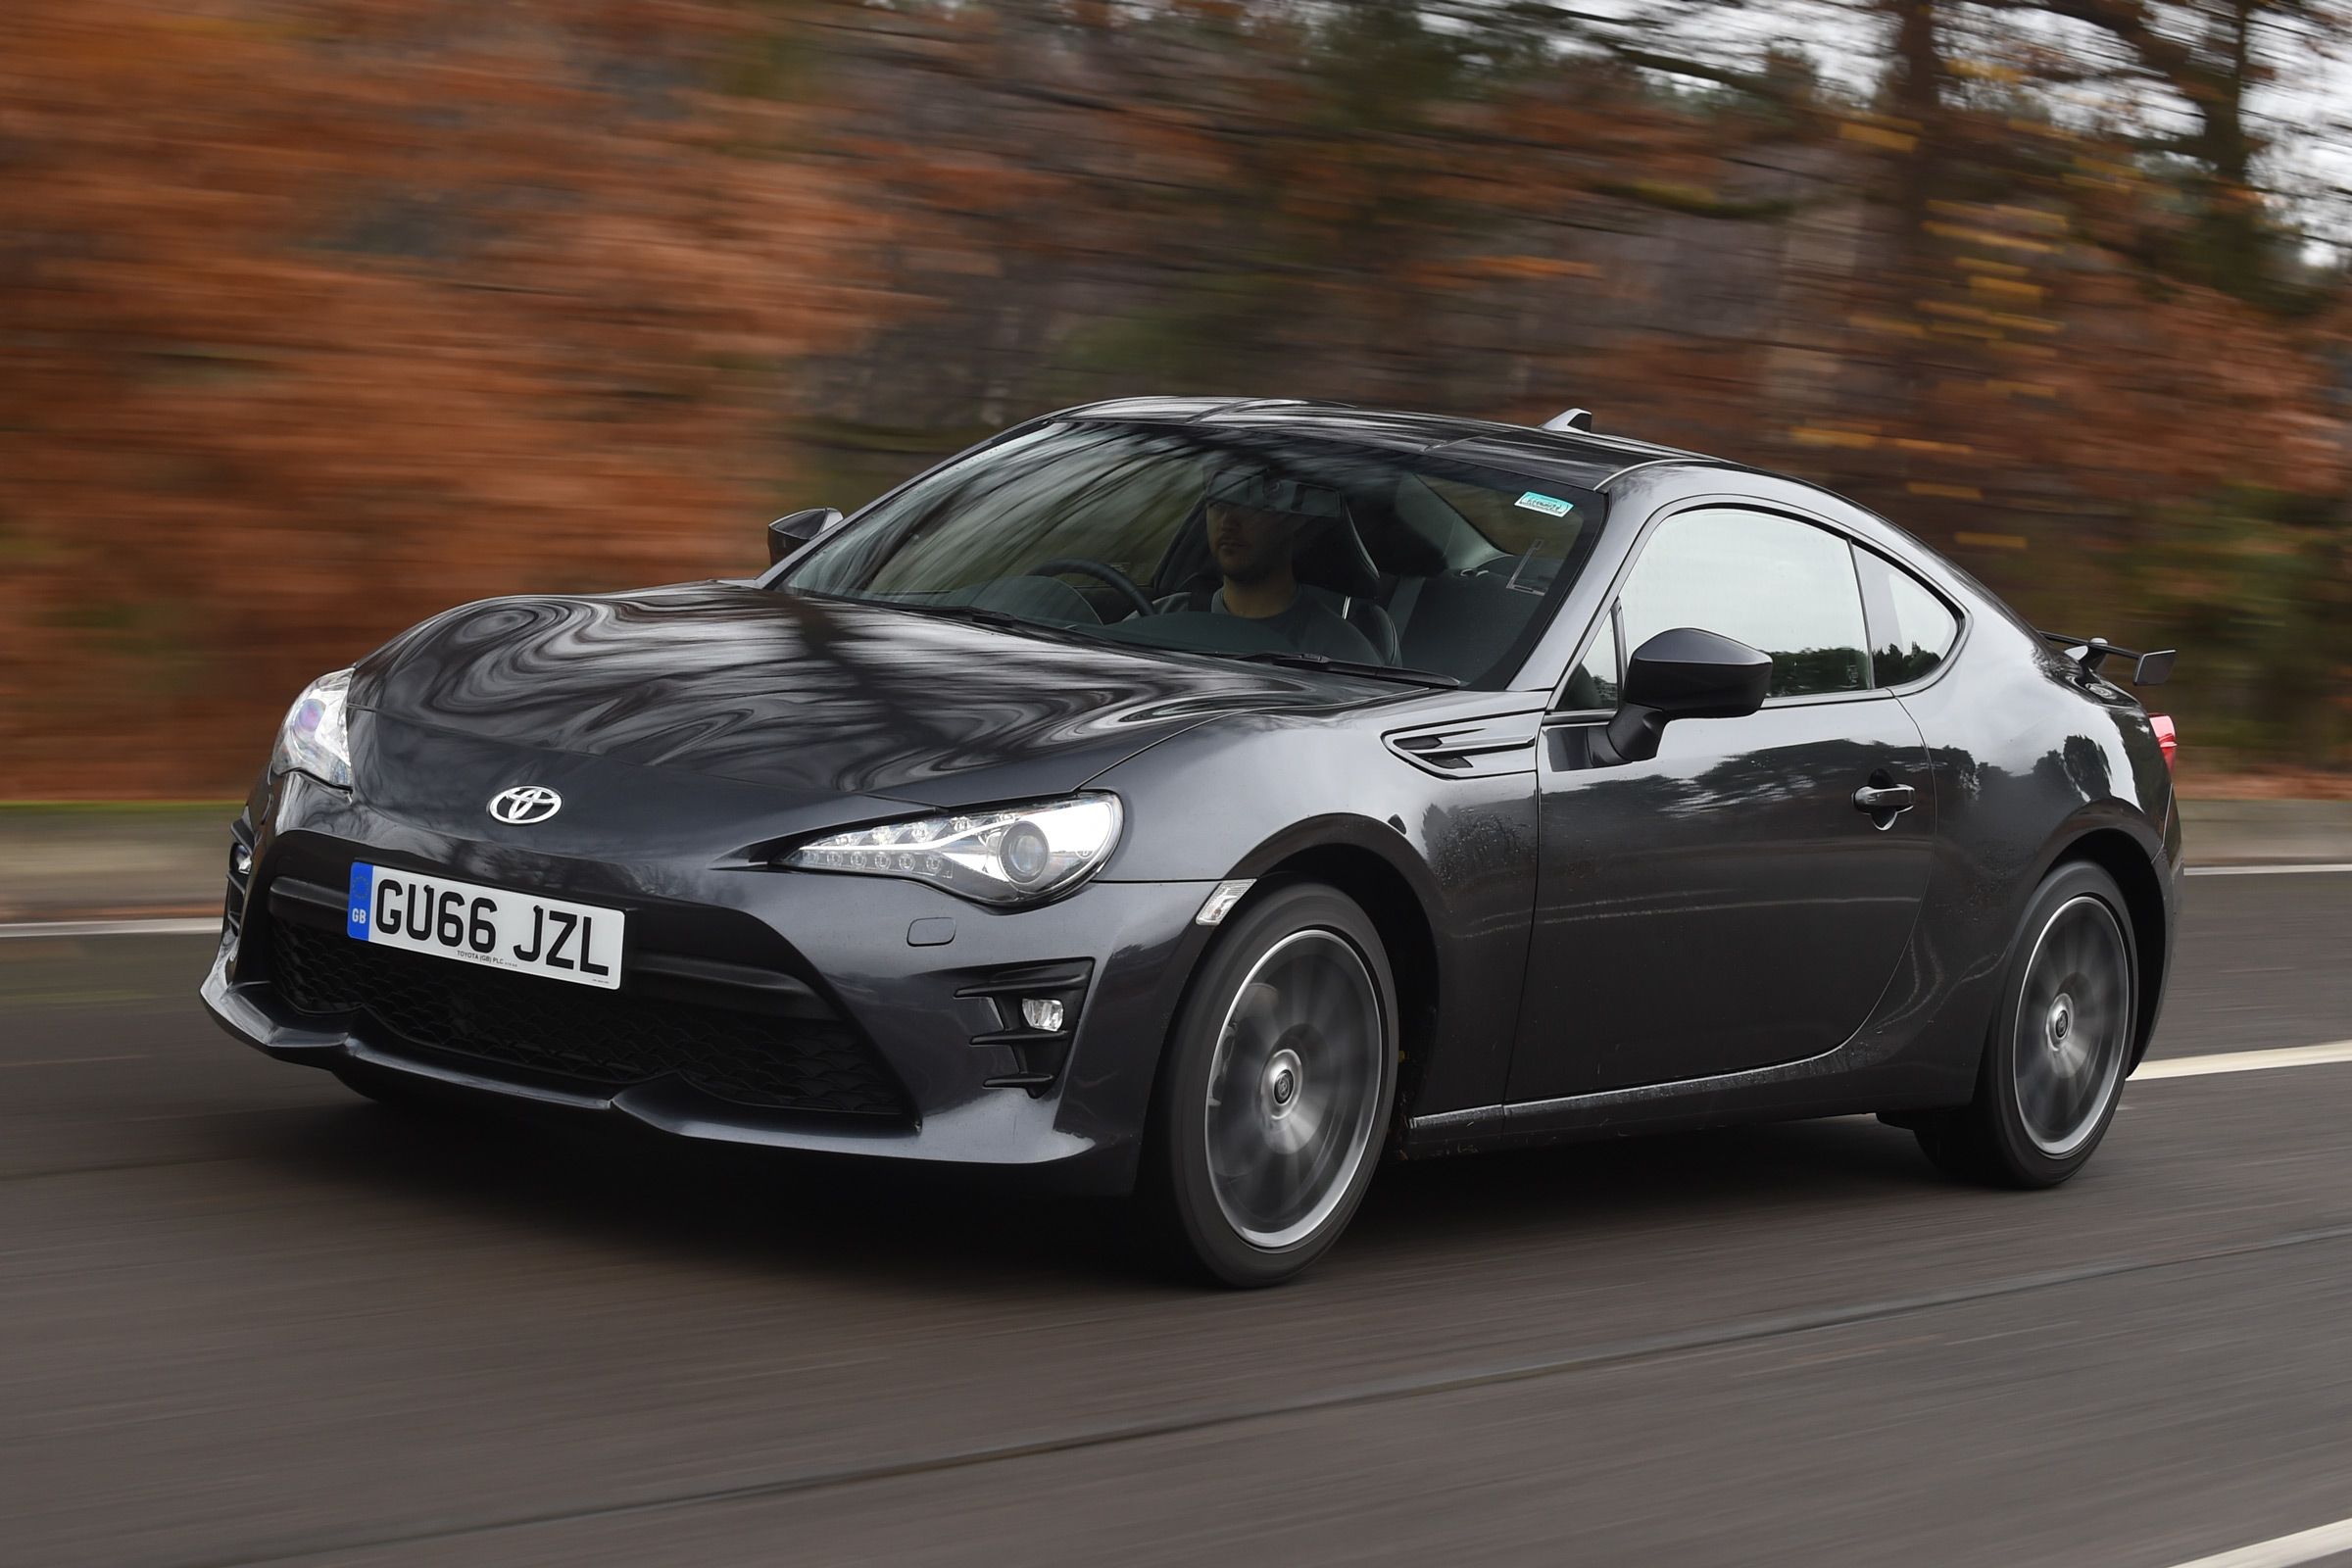 2017 Toyota Gt86 Black Test Drive (View 3 of 13)